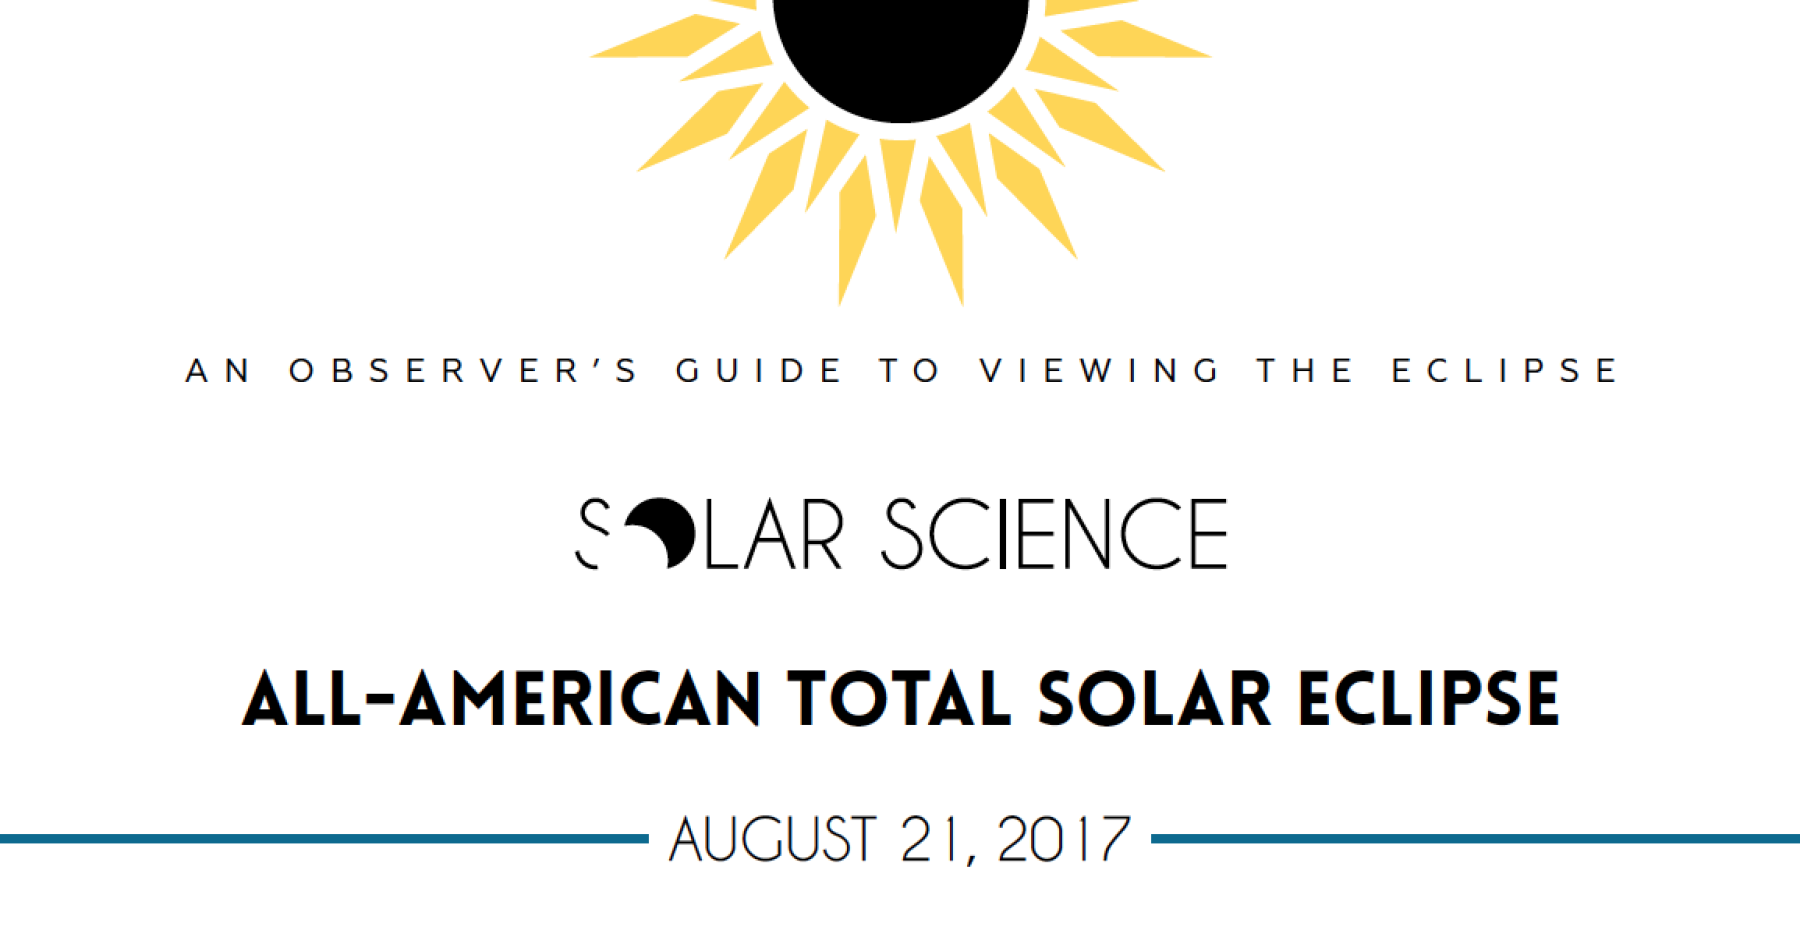 Image of a paper insert promoting the August 2017 solar eclipse